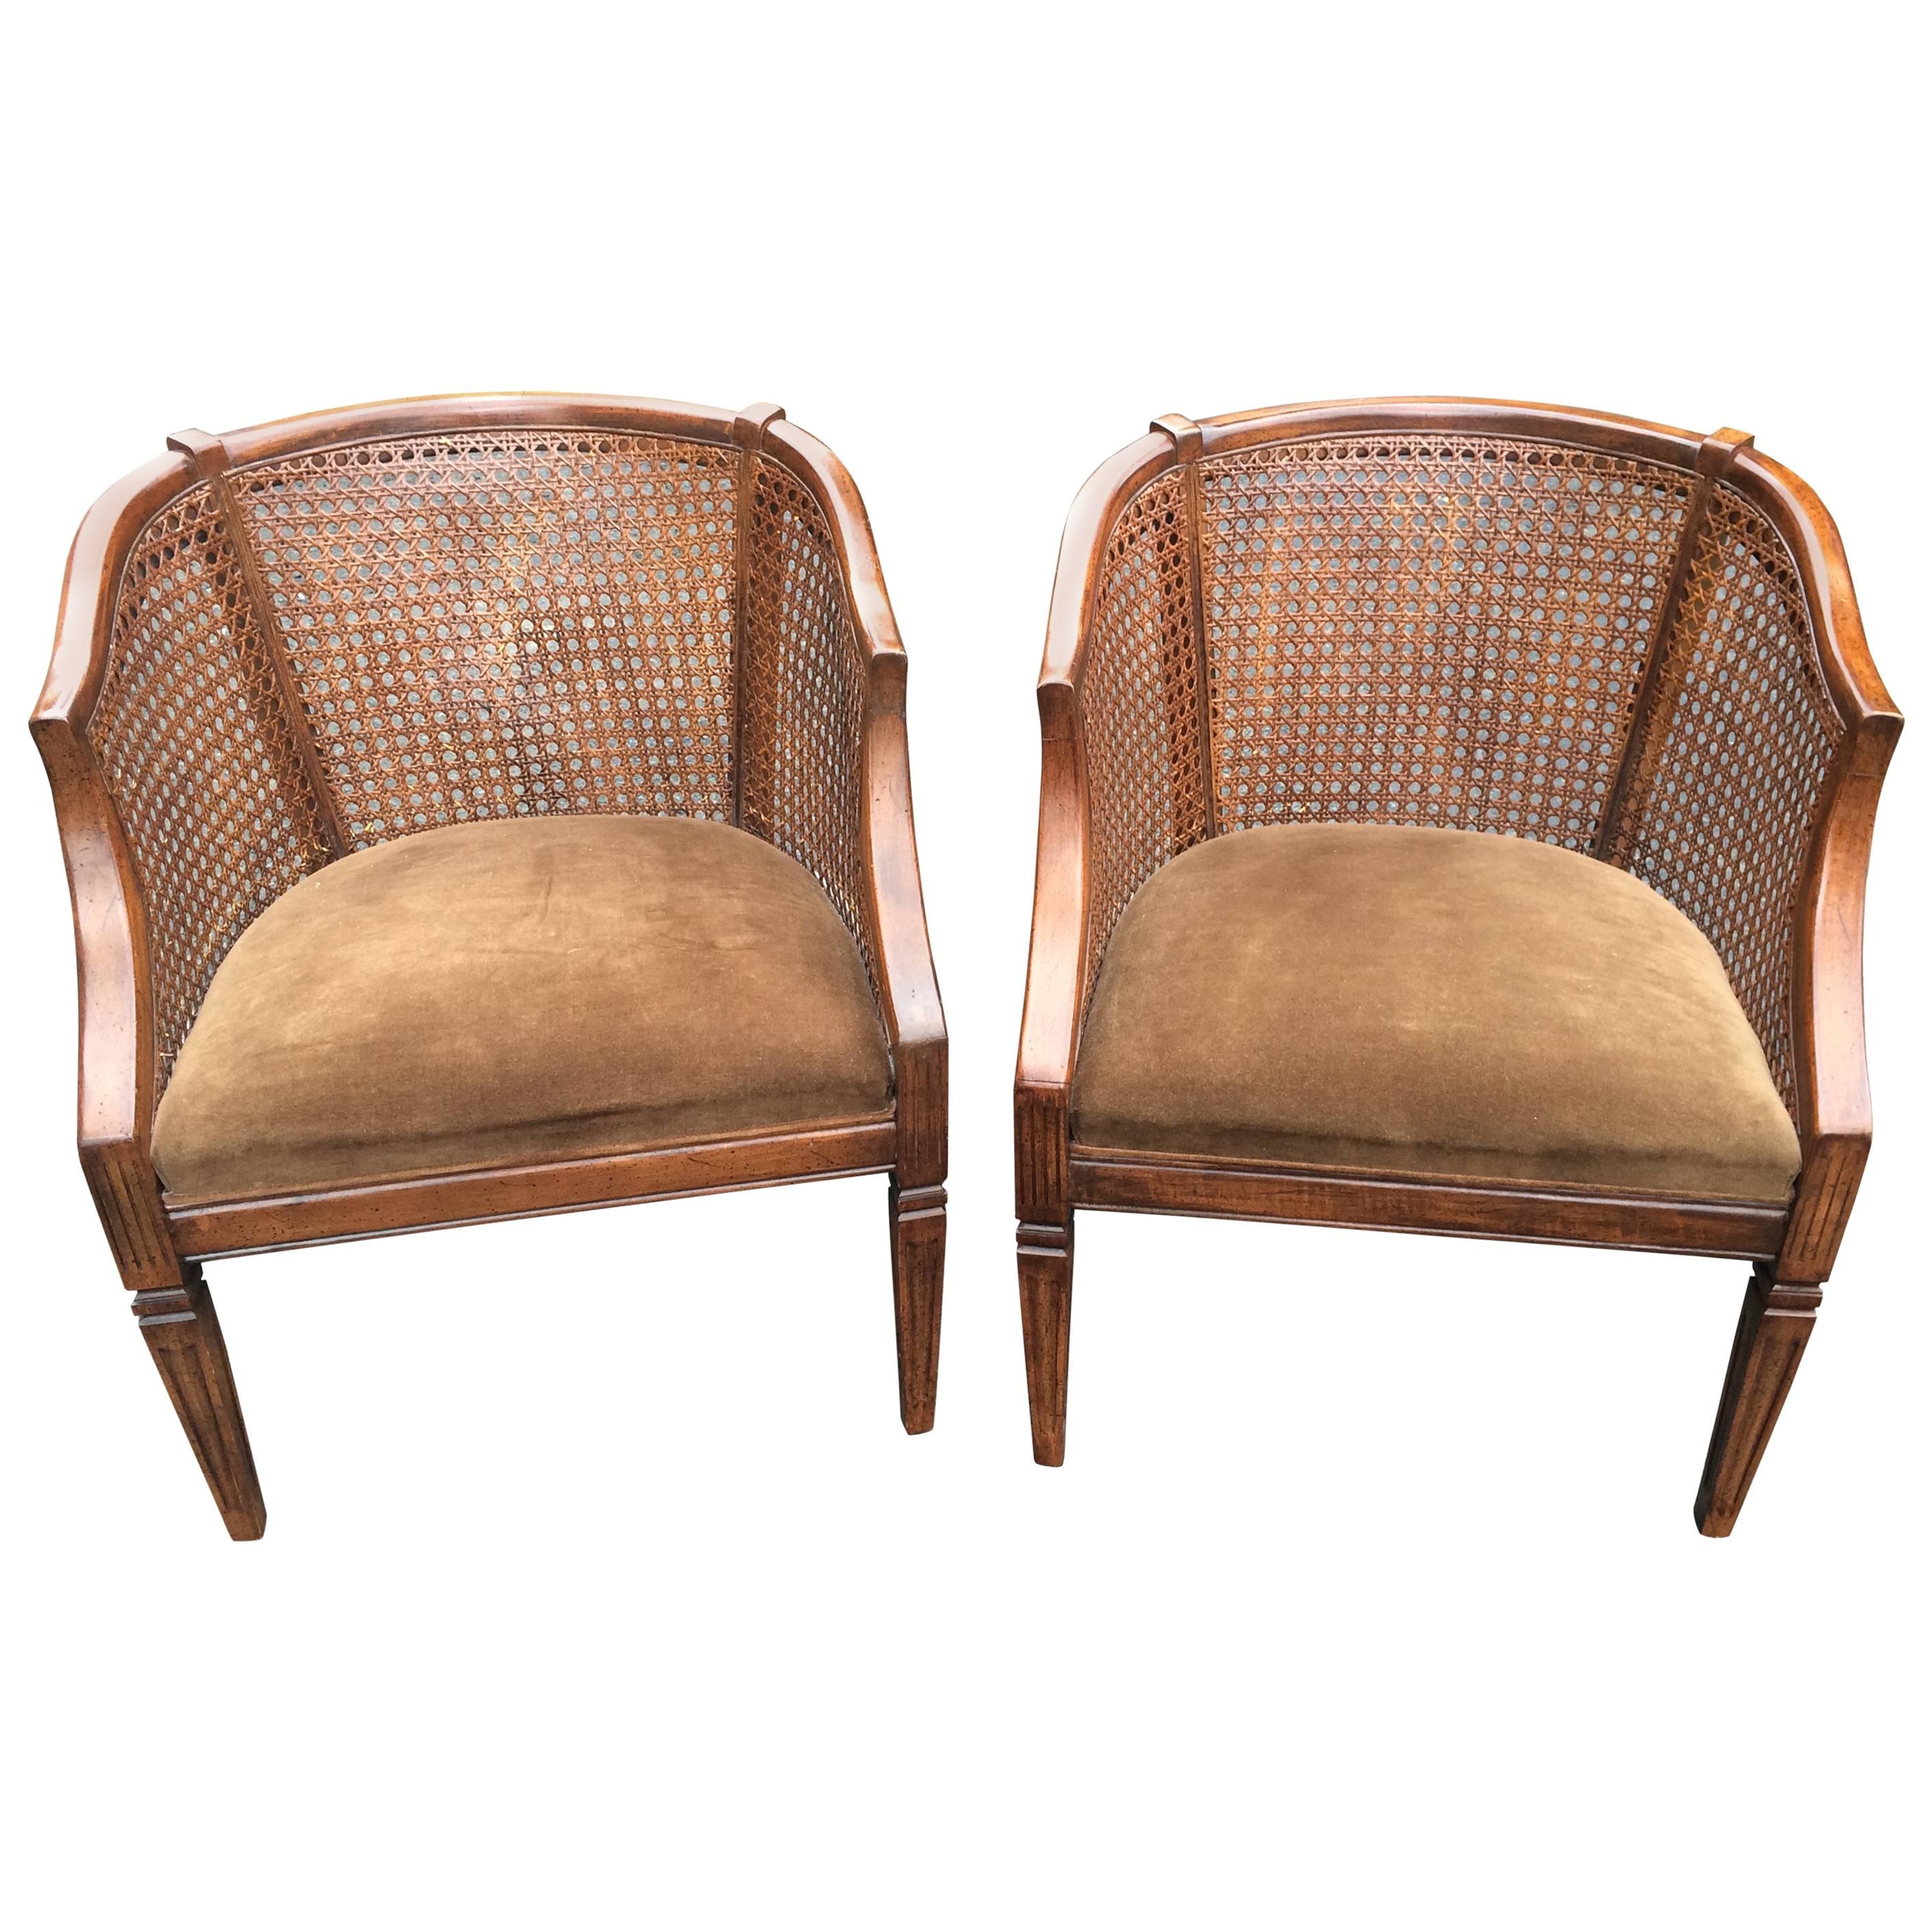 Traditional Pair of Carved Wood, Caned and Velvet Library Chairs